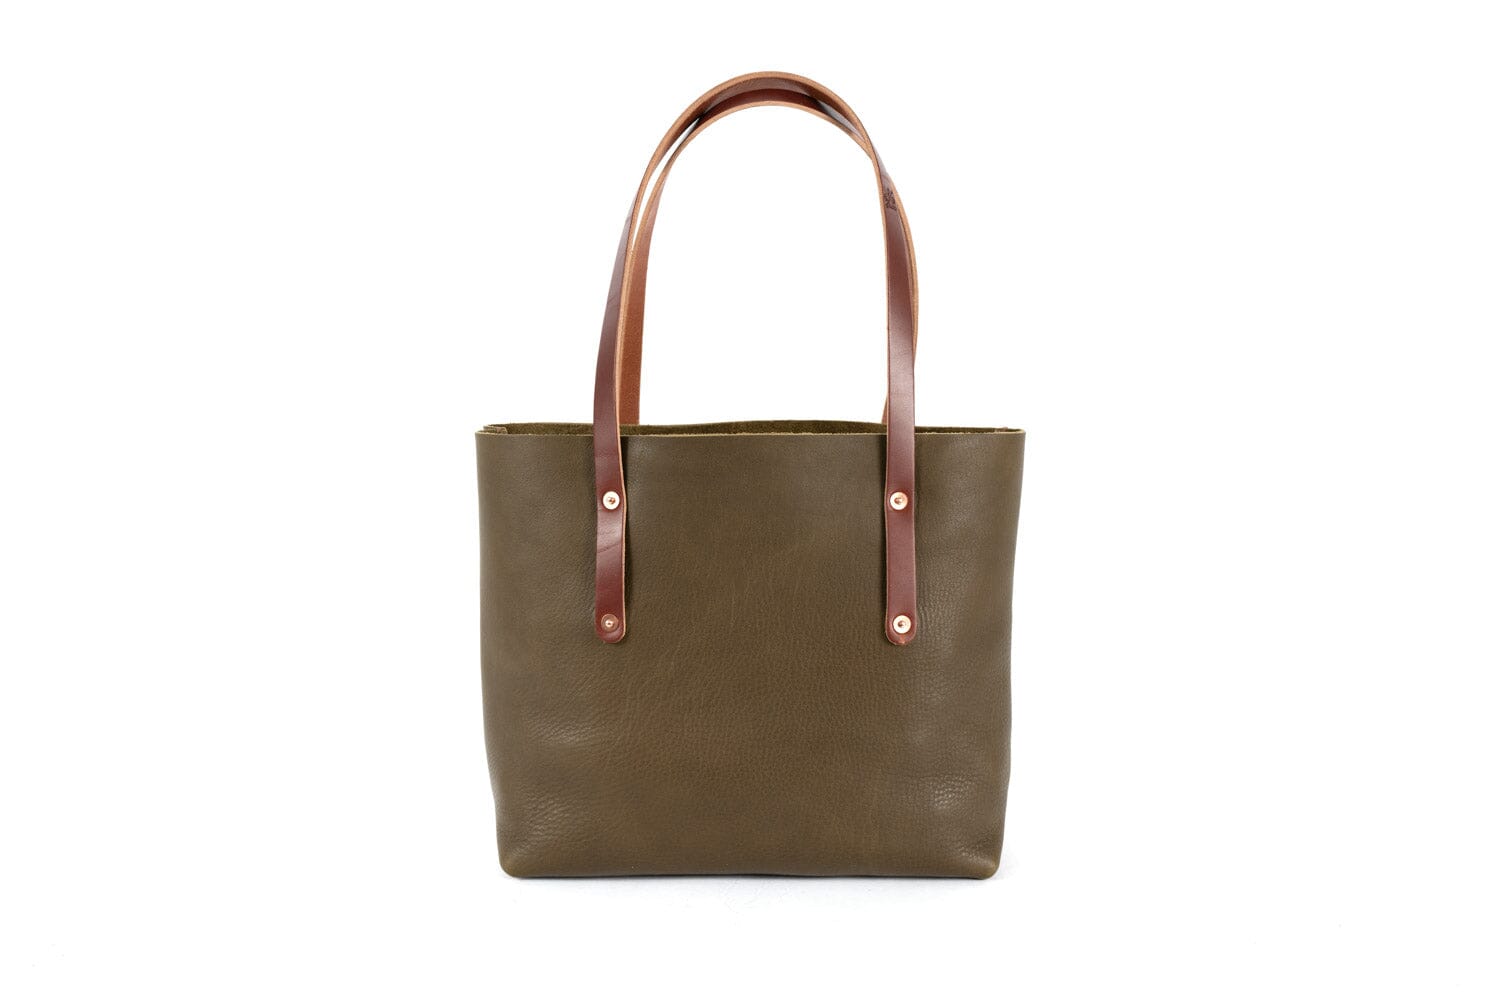 AVERY LEATHER TOTE BAG - SMALL - OLIVE